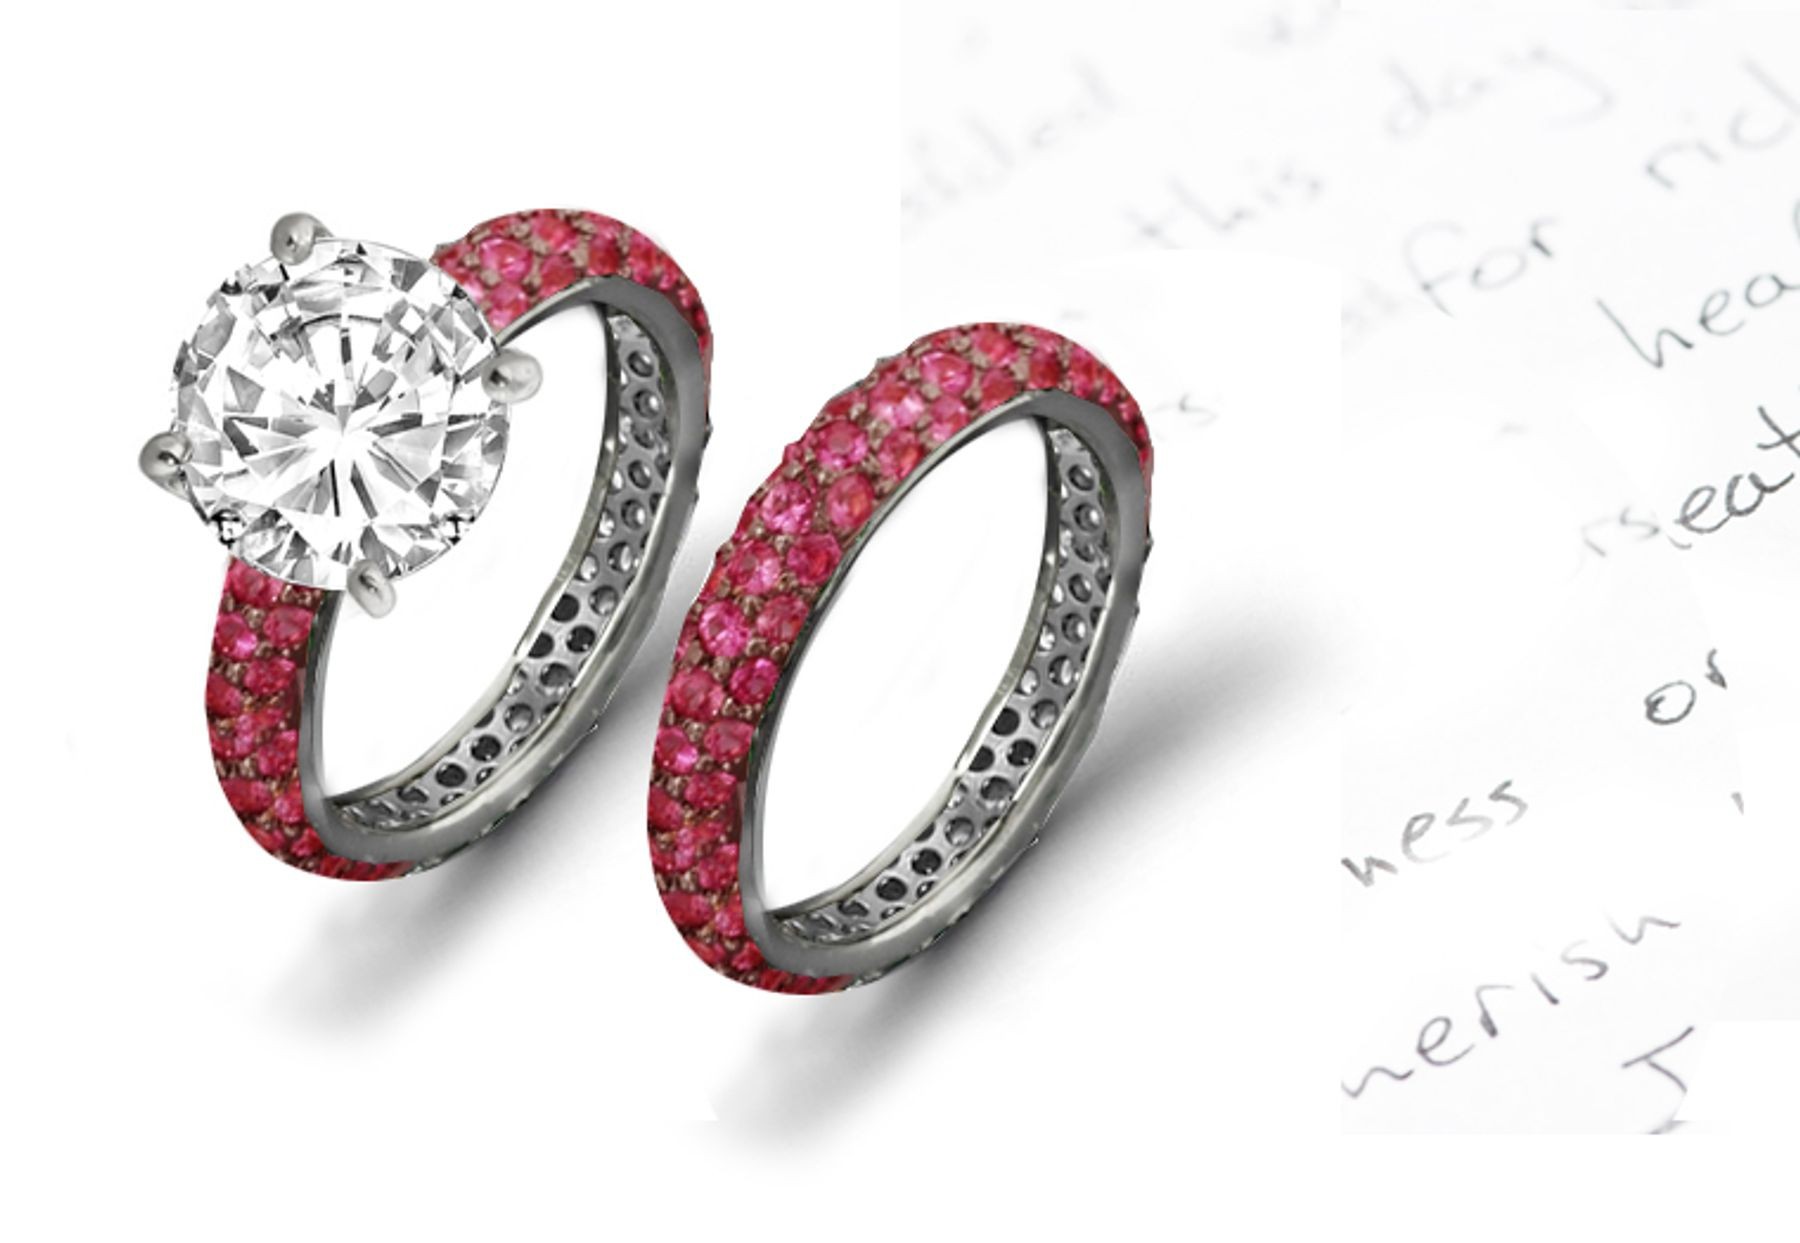 Specially Prepared: Round 0.75 ct Diamond atop Wide Pave Ruby Ring & Strong Enduring Platinum Wedding Band